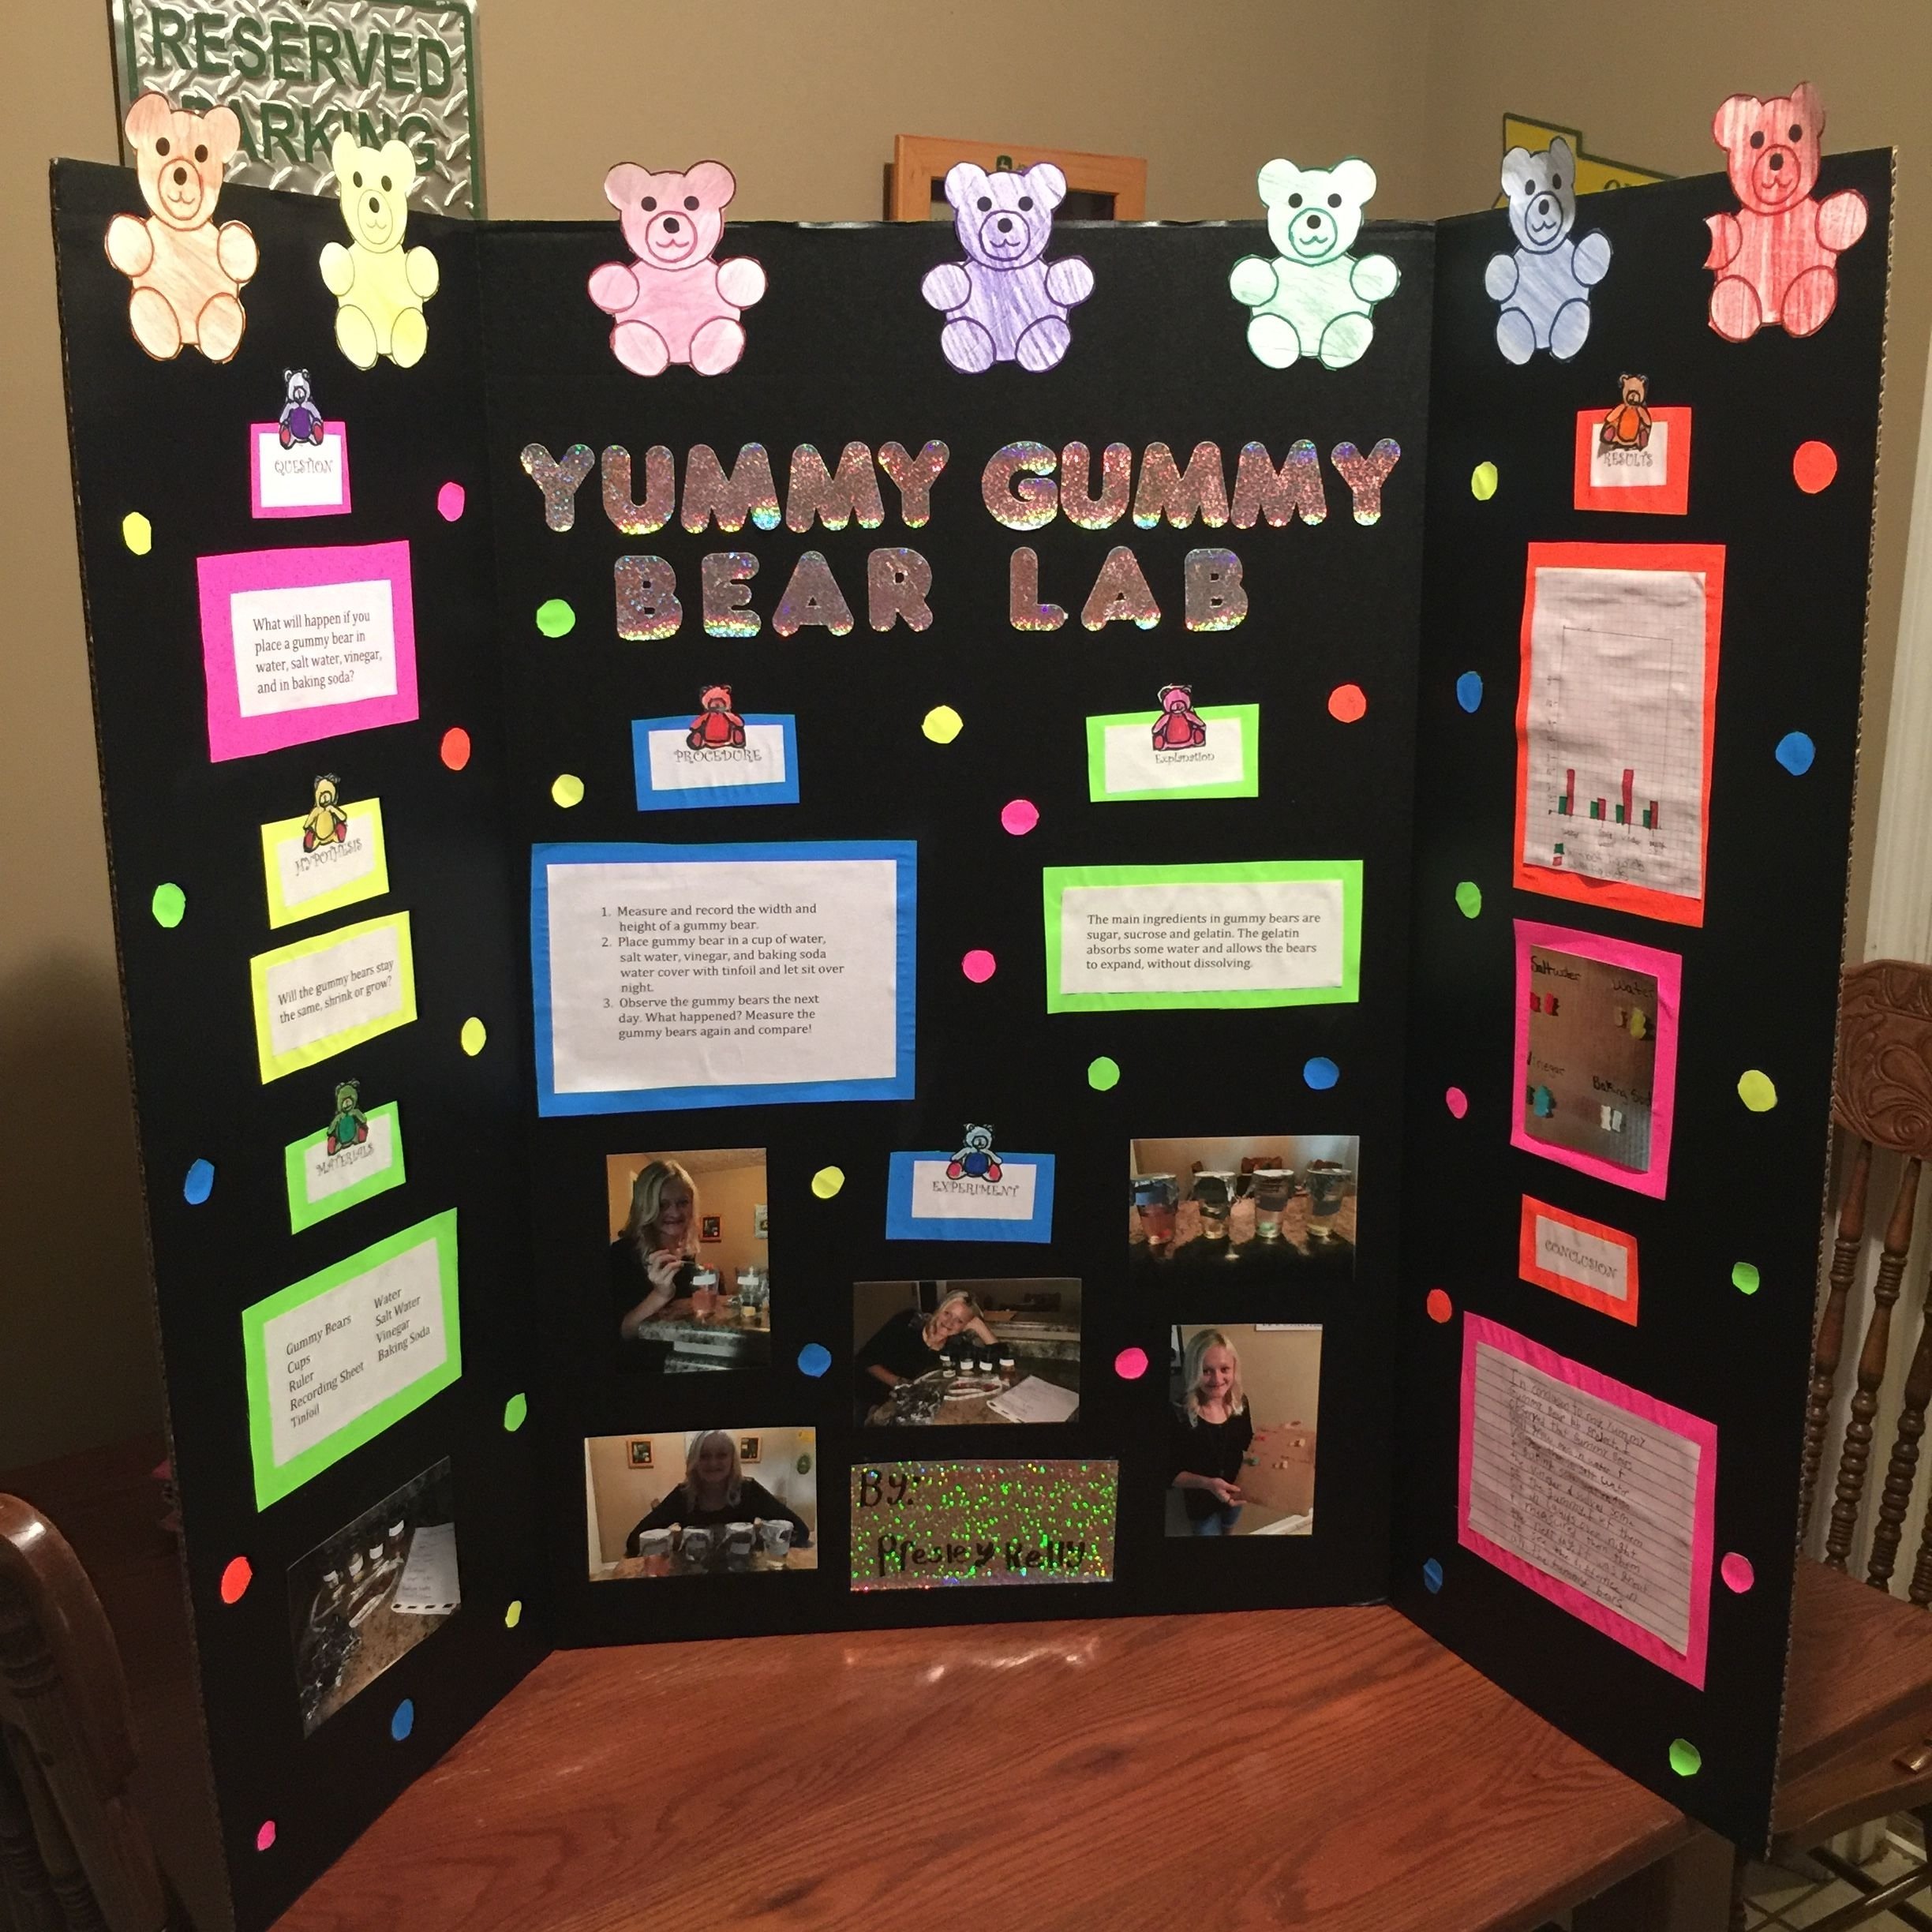 10 Wonderful Stem Project Ideas For Middle School our 4th grade science fair project yummy gummy bear lab lots of 13 2022